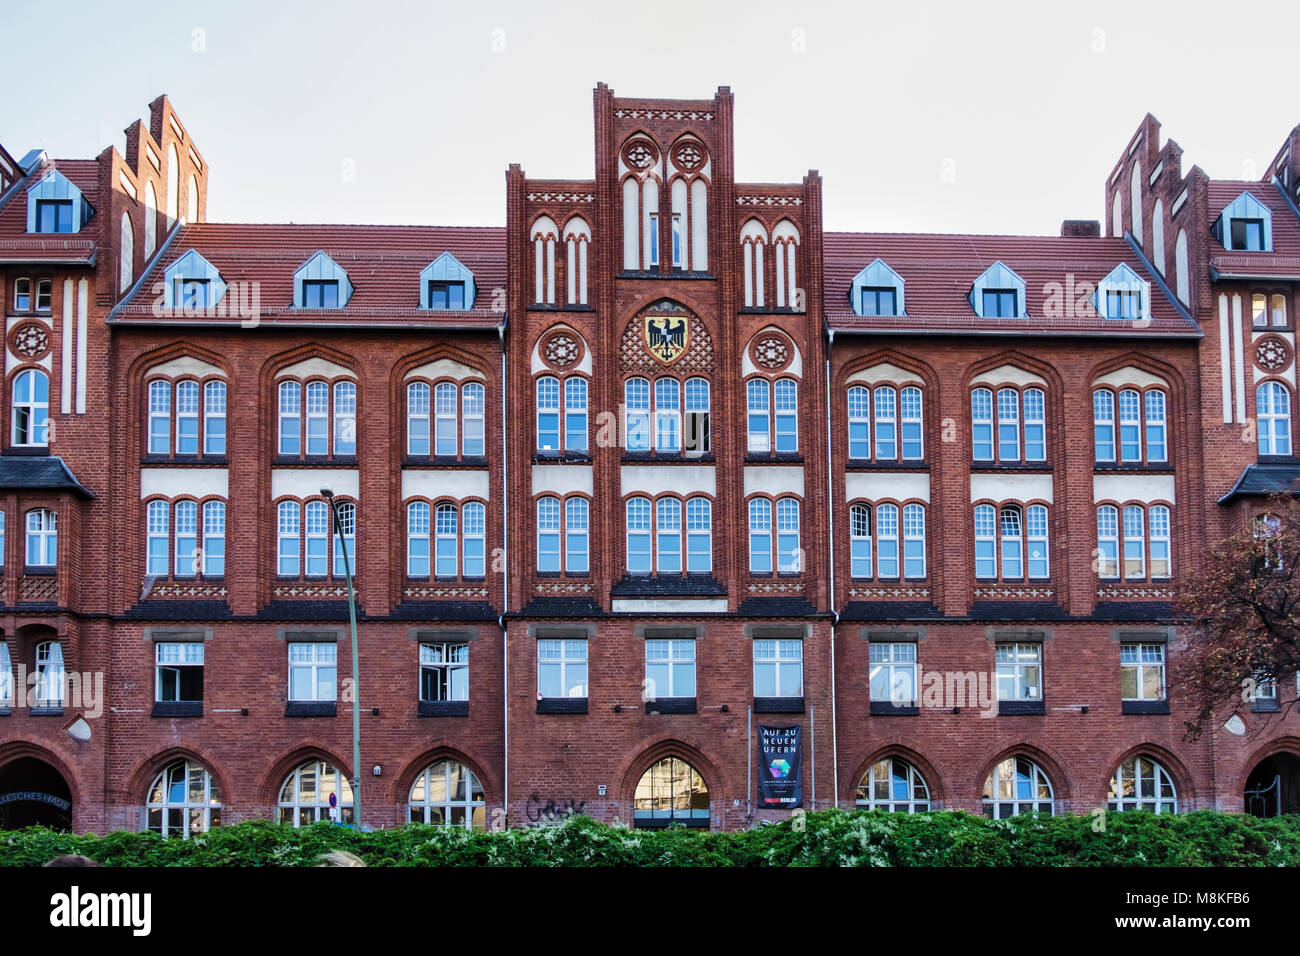 Berlin Kreuzberg. Old Post Office building exterior with clinker brick façade, gables, arched windows & decorative details Historic listed building in Stock Photo